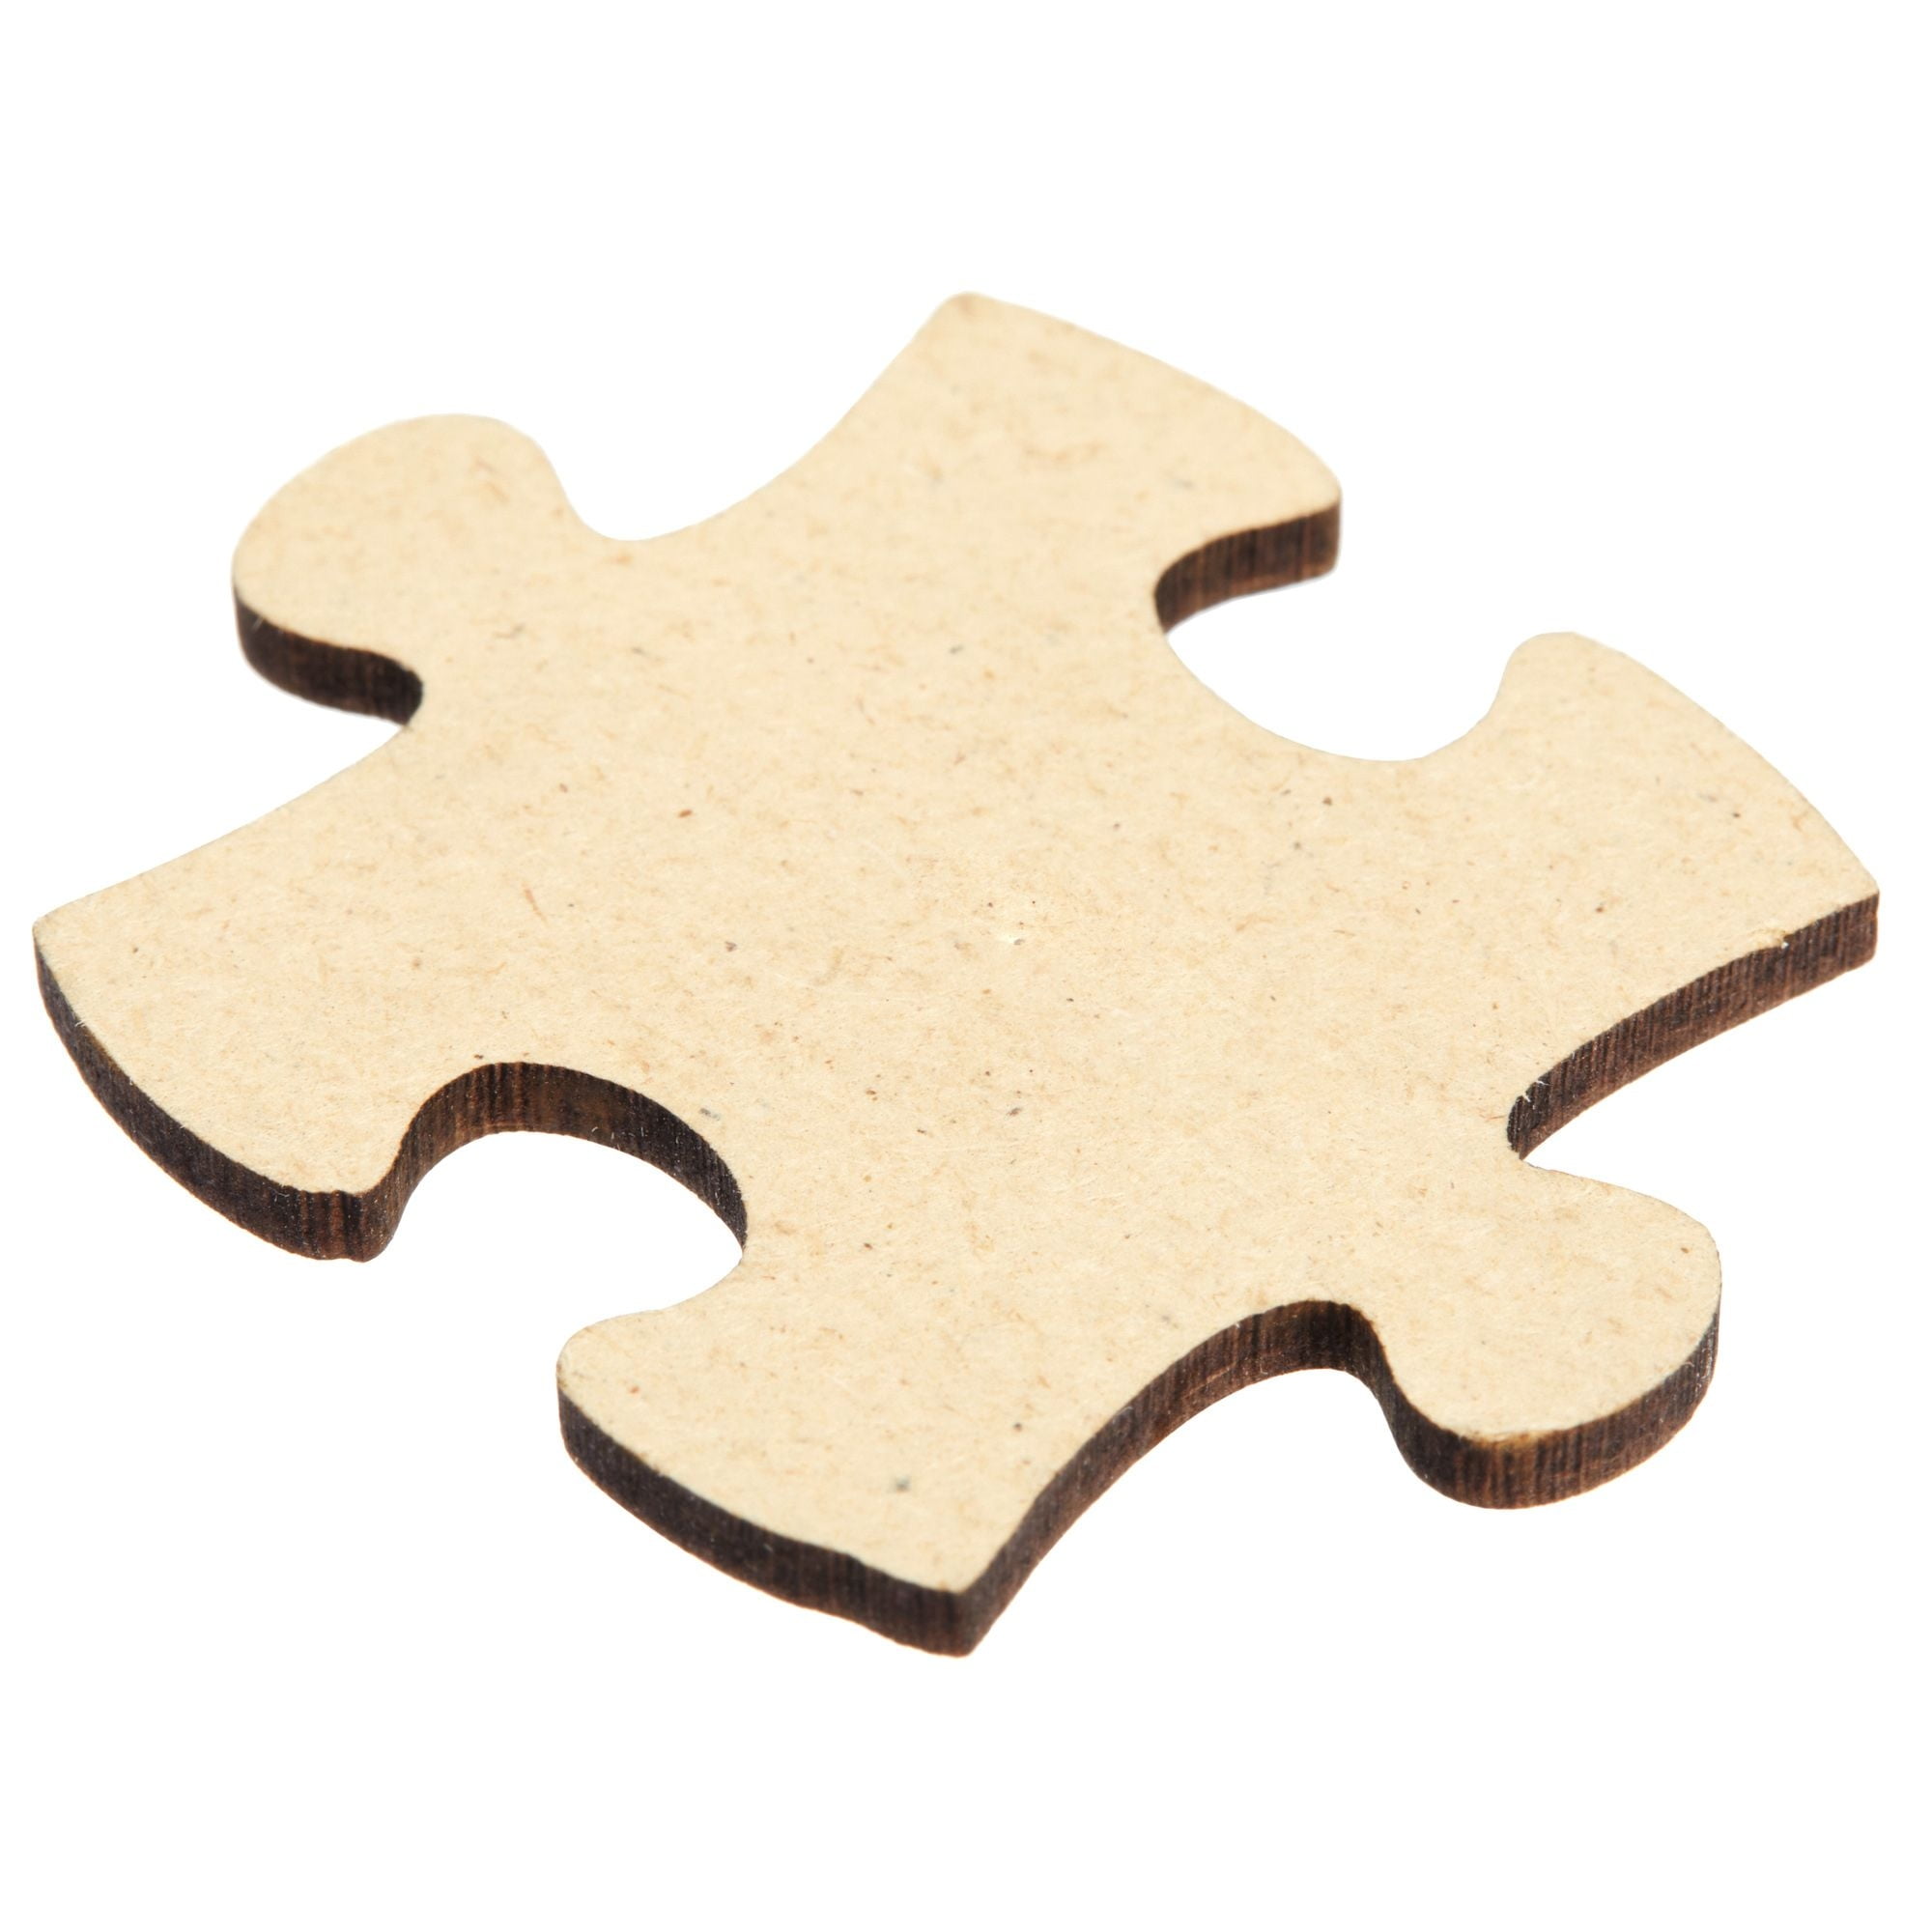 Blank Unfinished Wooden Jigsaw Puzzle (100 Pieces), Pack - Pick 'n Save